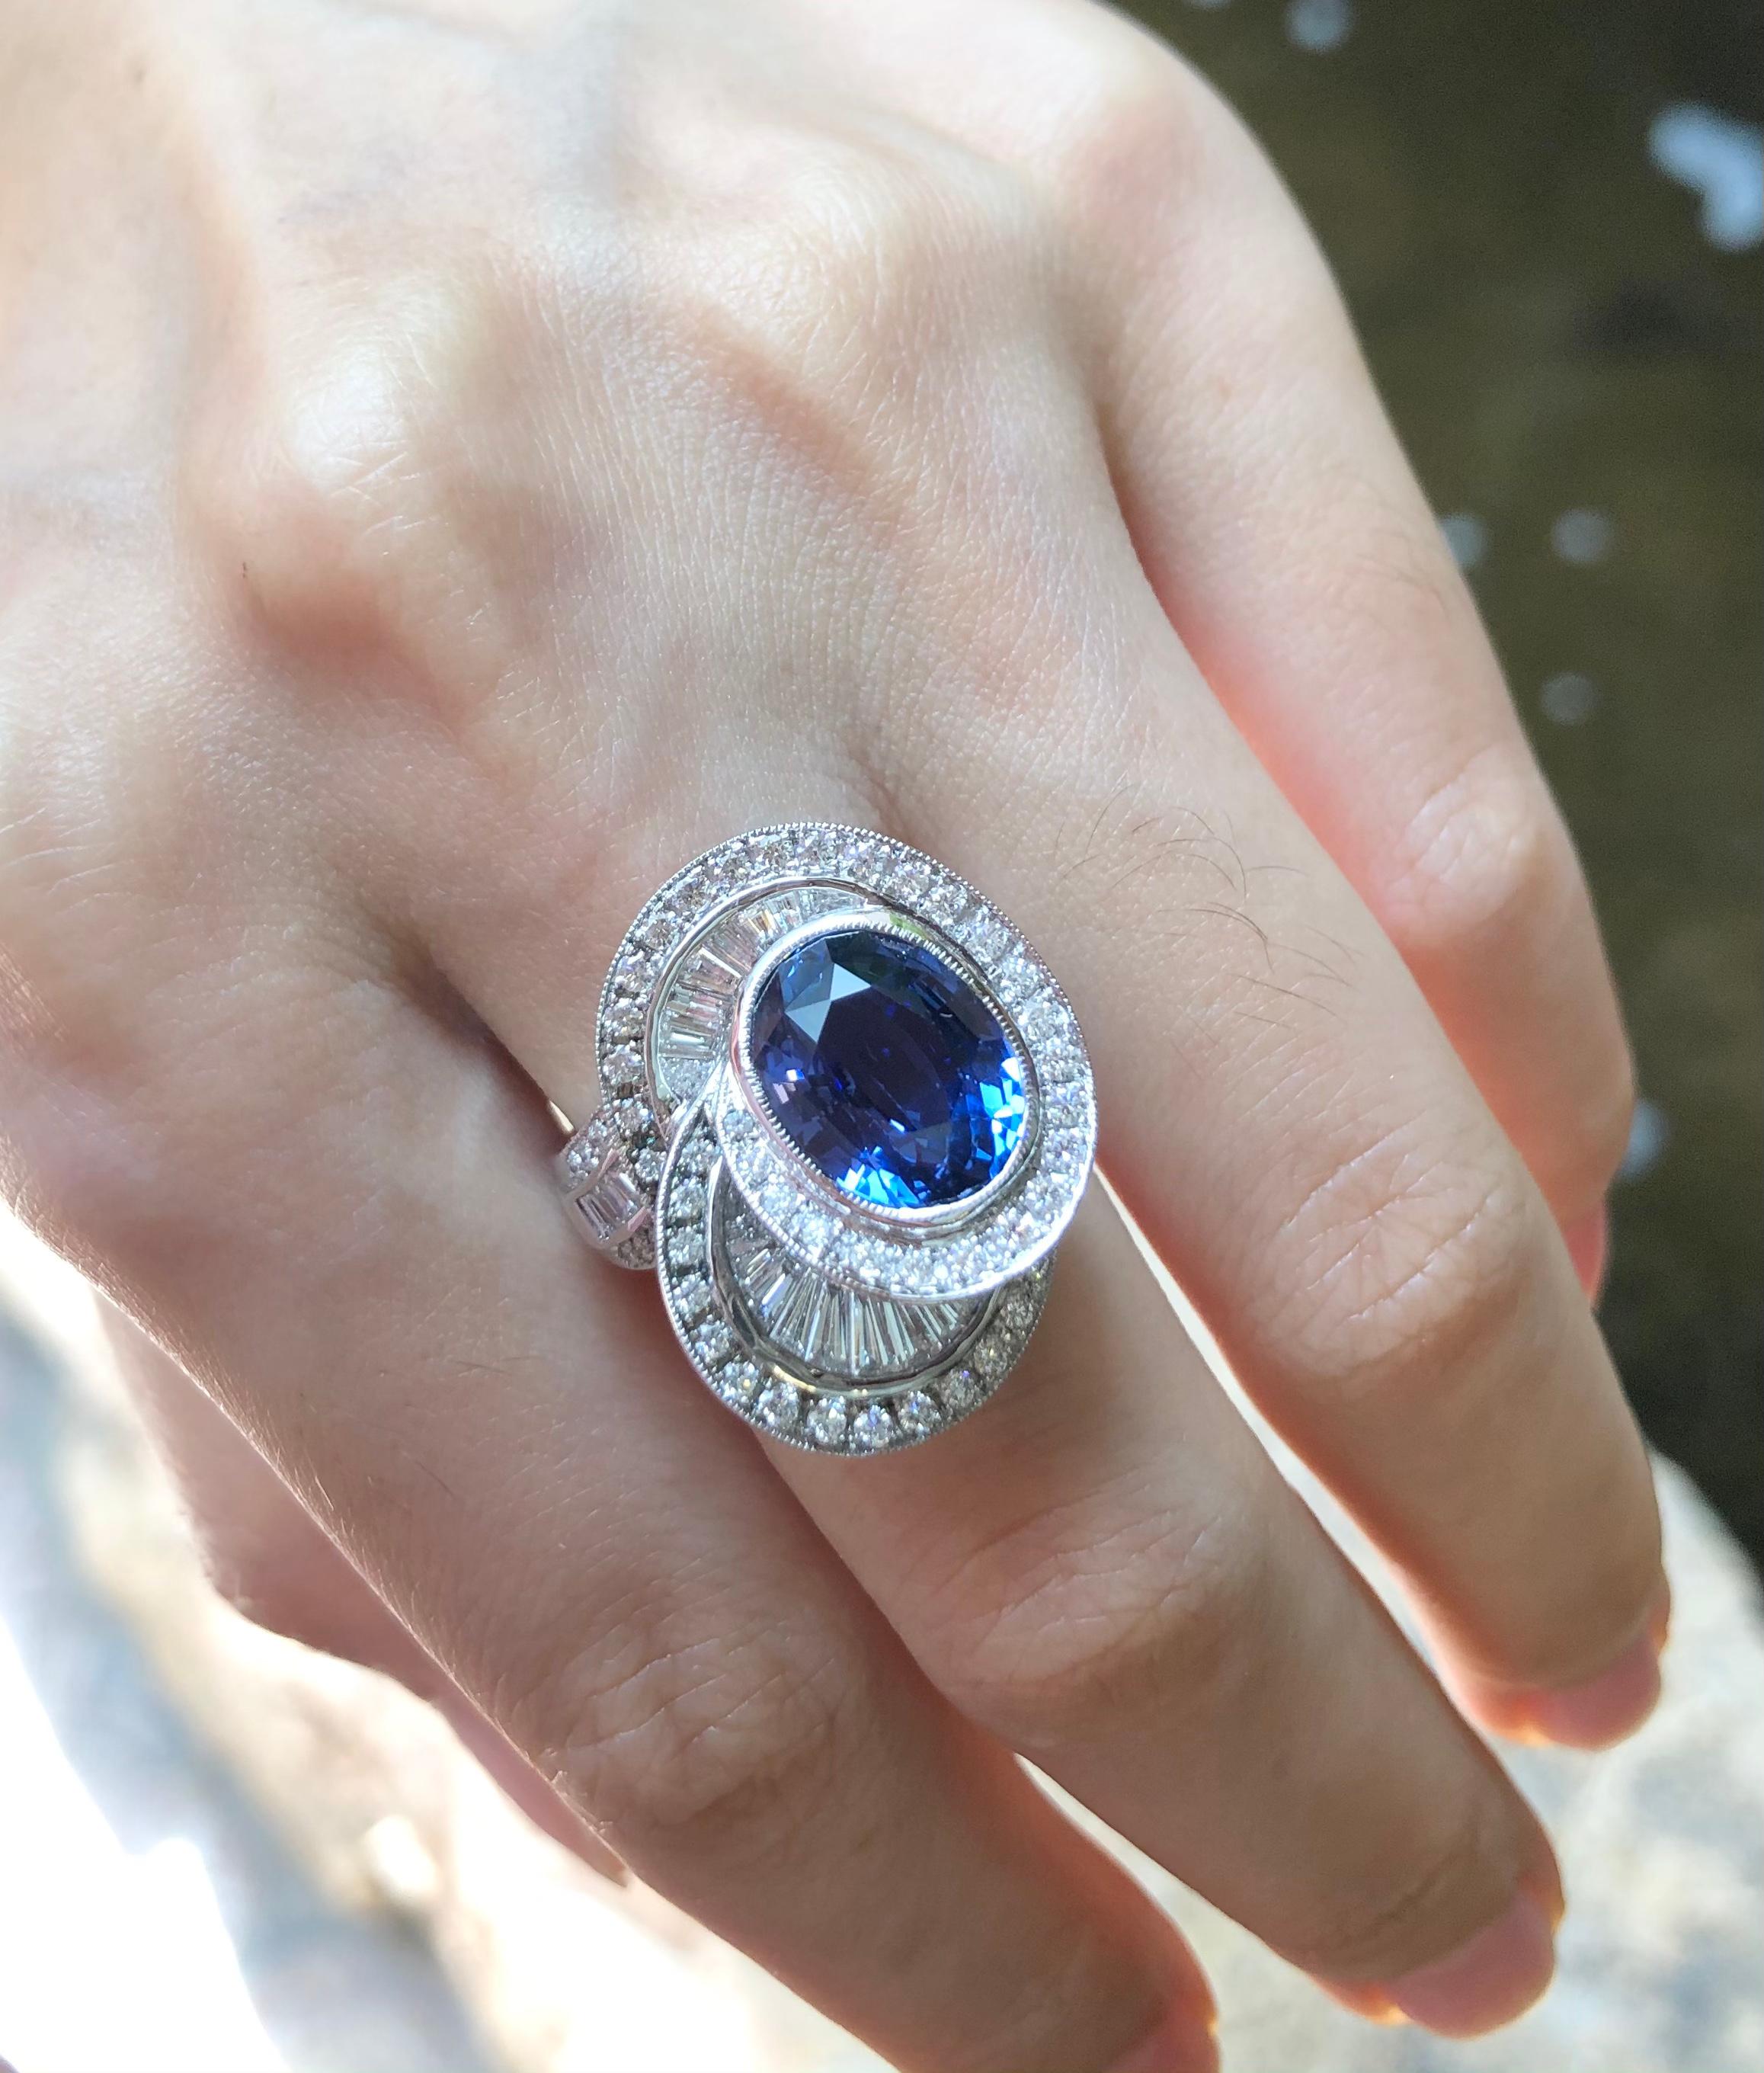 Blue Sapphire 6.05 carats with Diamond 1.56 carats Ring set in Platinum 950 Settings

Width:  1.6 cm 
Length:  2.4 cm
Ring Size: 53
Total Weight: 16.46 grams

